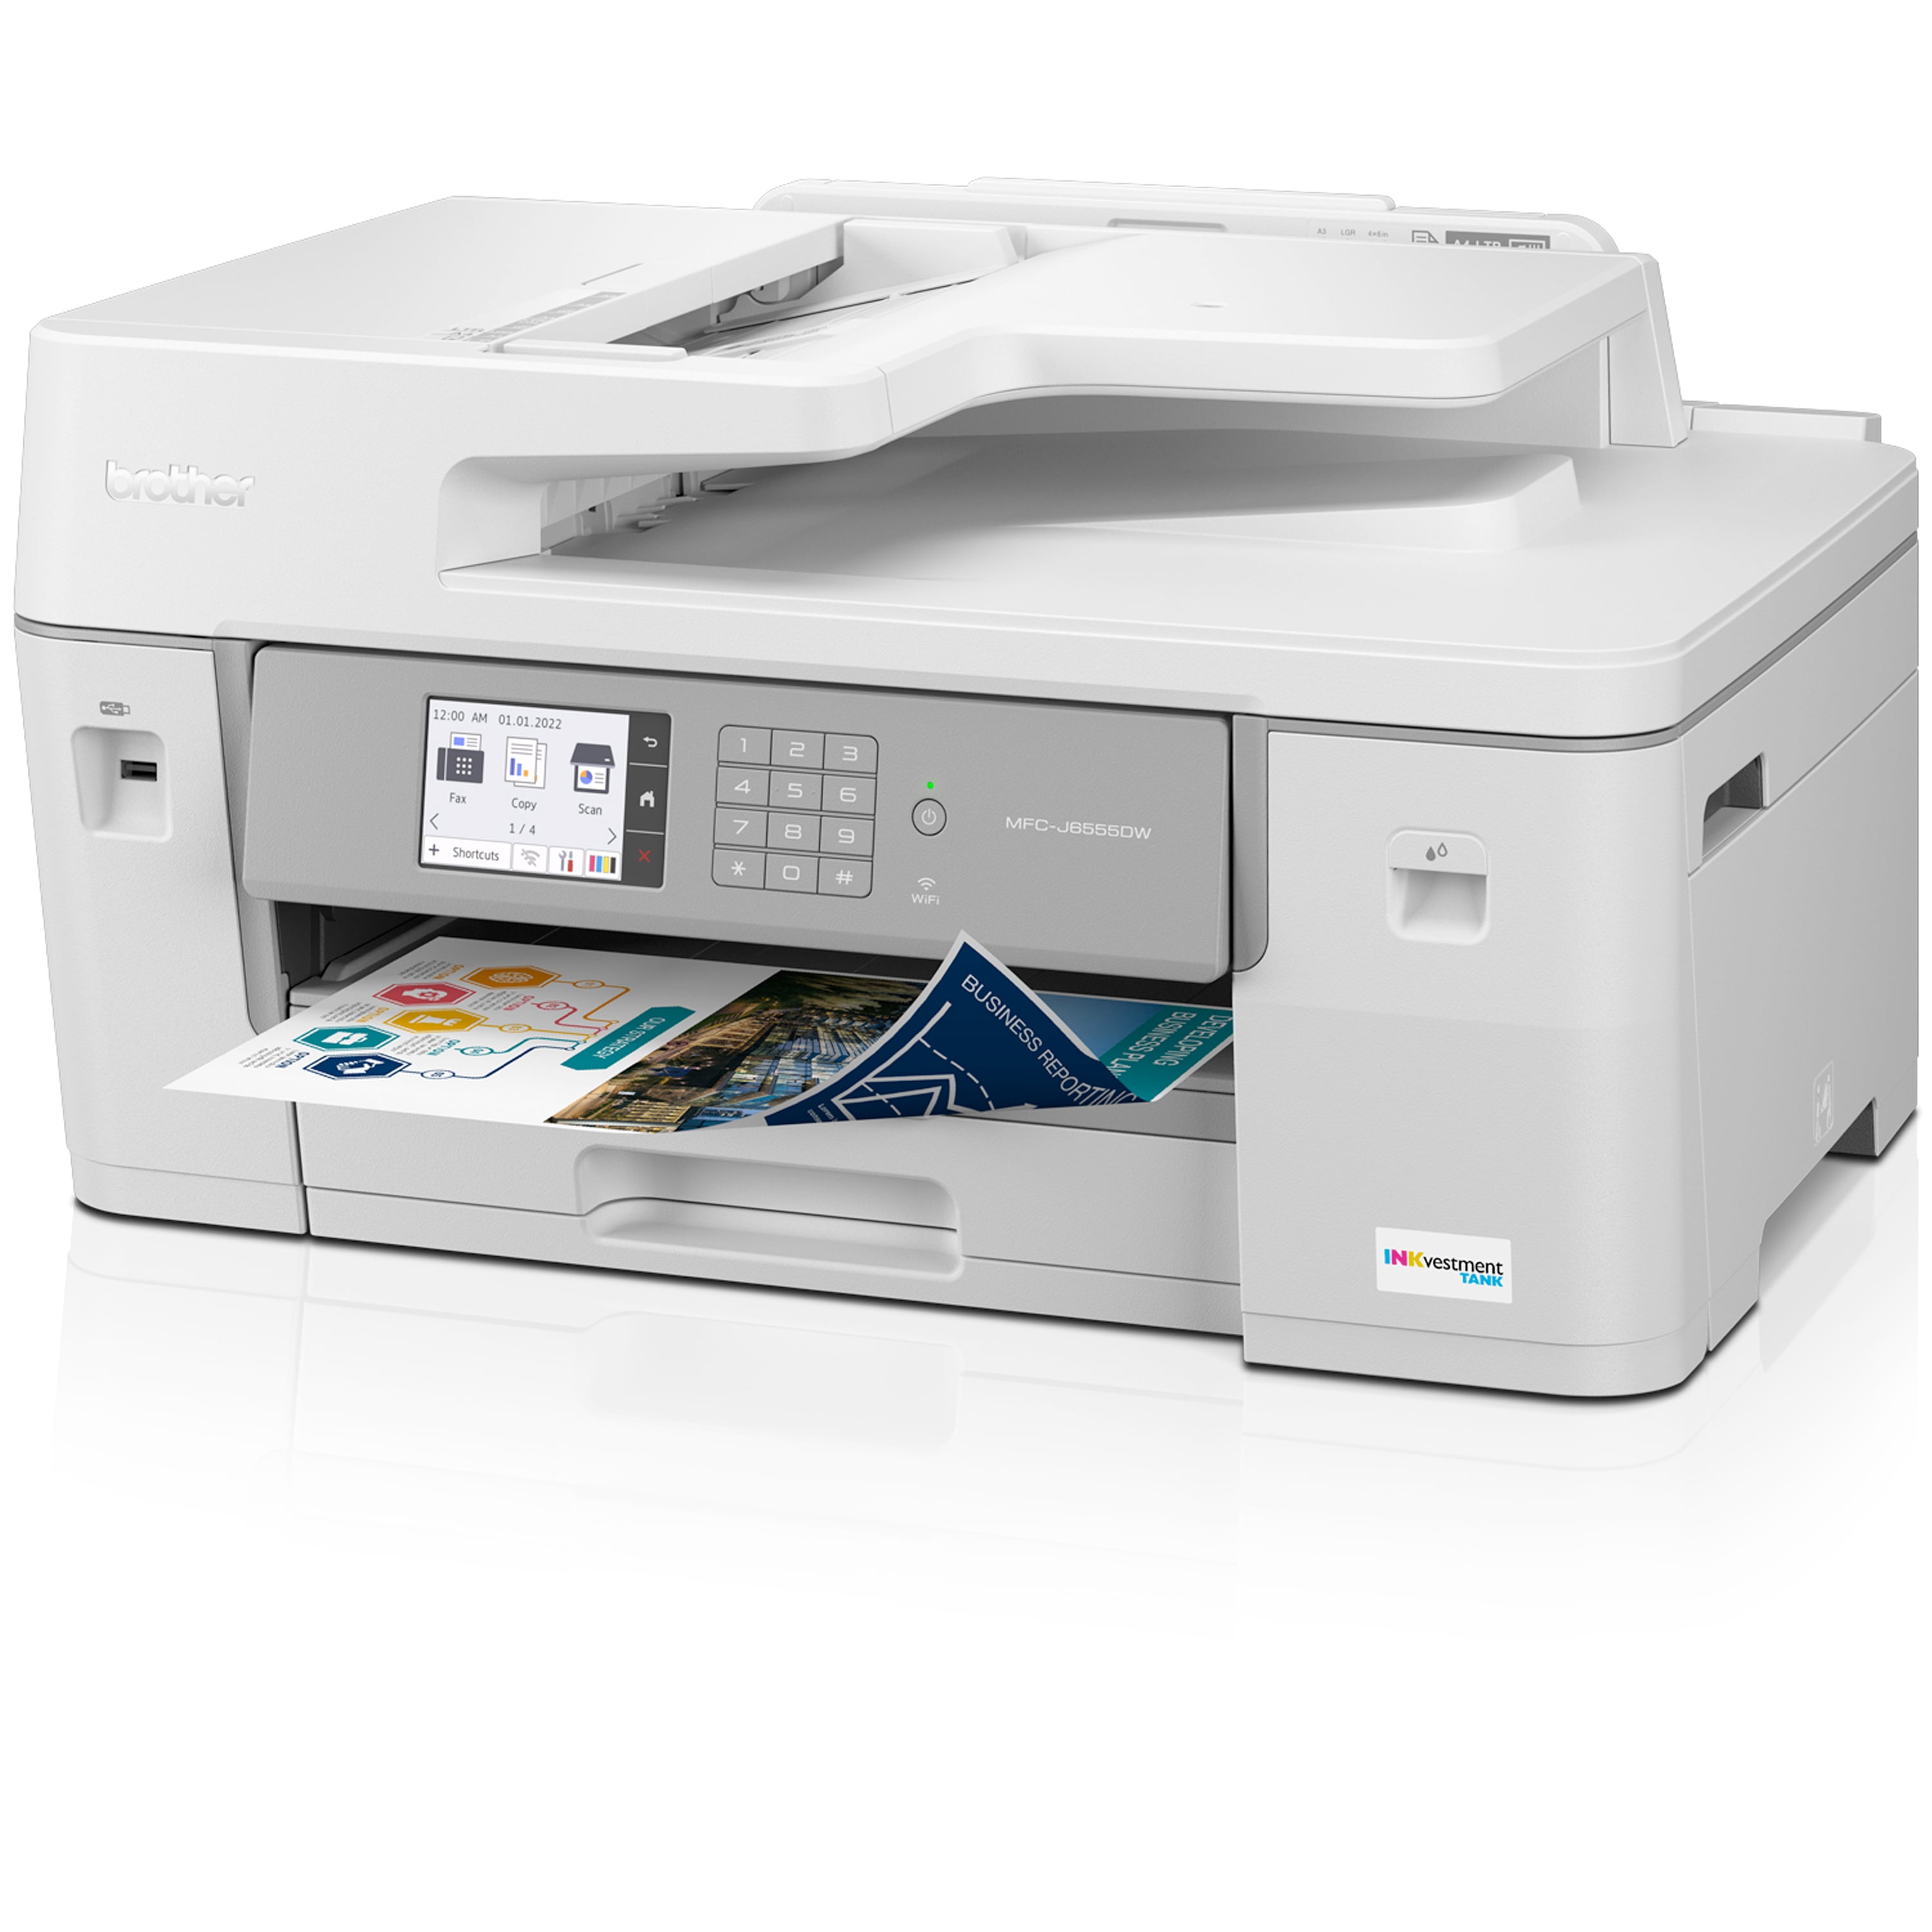 klistermærke skrig gå i stå Brother MFC-J6555DW INKvestment Tank Color Inkjet All-In-One Printer with  up to 1 Year of Ink In-box1 and 11” x 17” print, copy, scan, and fax  capabilities - Walmart.com